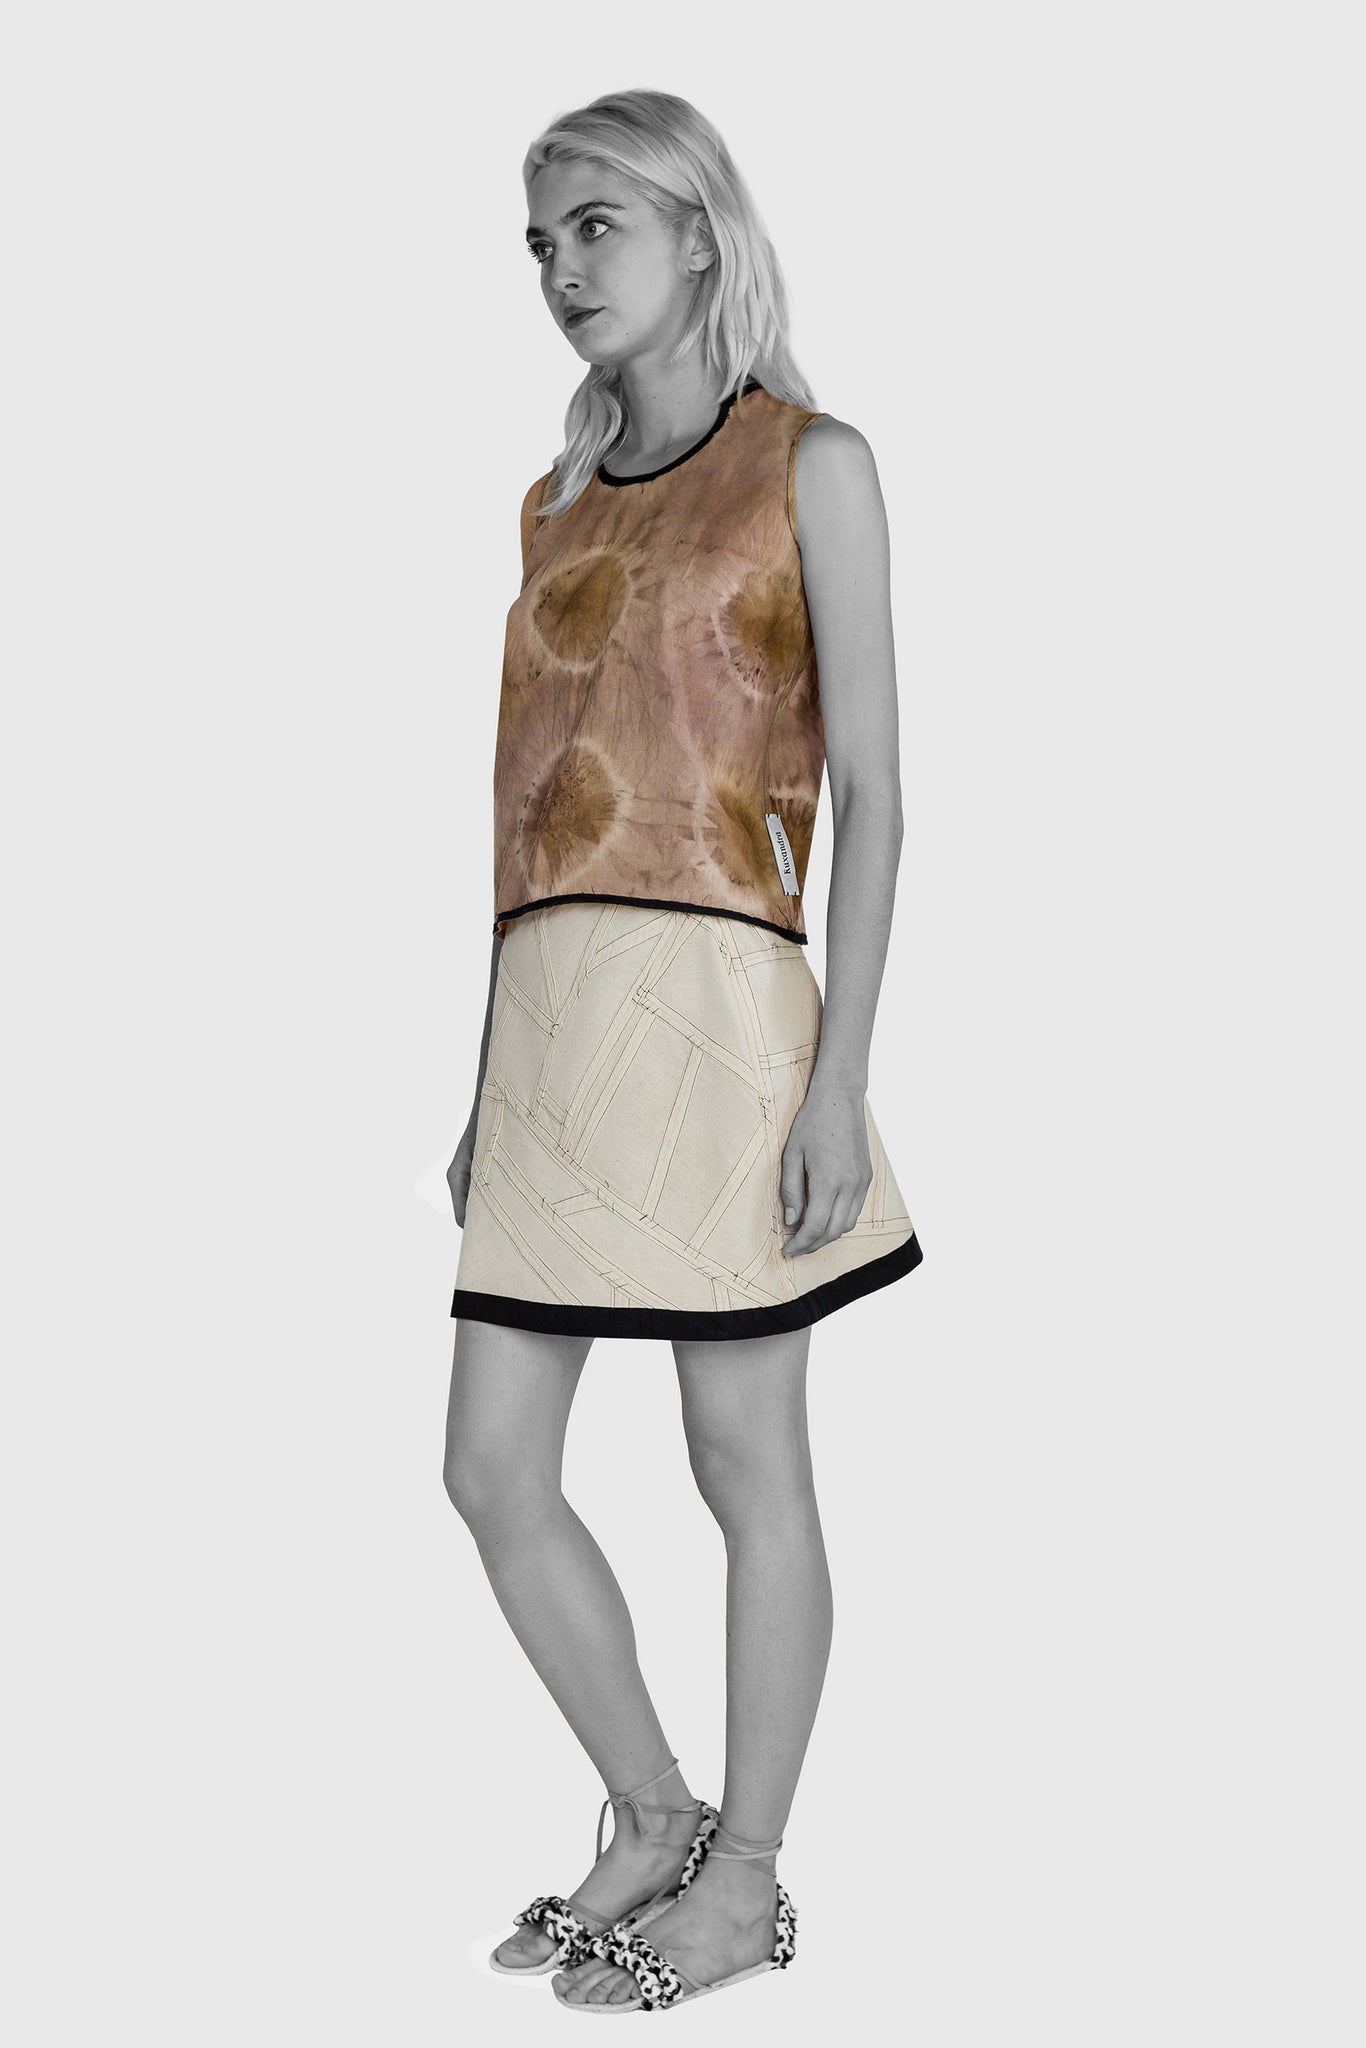 Ruxandra designed short skirt, patchwork design, different direction of cotton patches, outlined by black wool, black and white avantgarde style, futuristic technical textile, paired with natural dyed Shibori sleeveless T-shirt